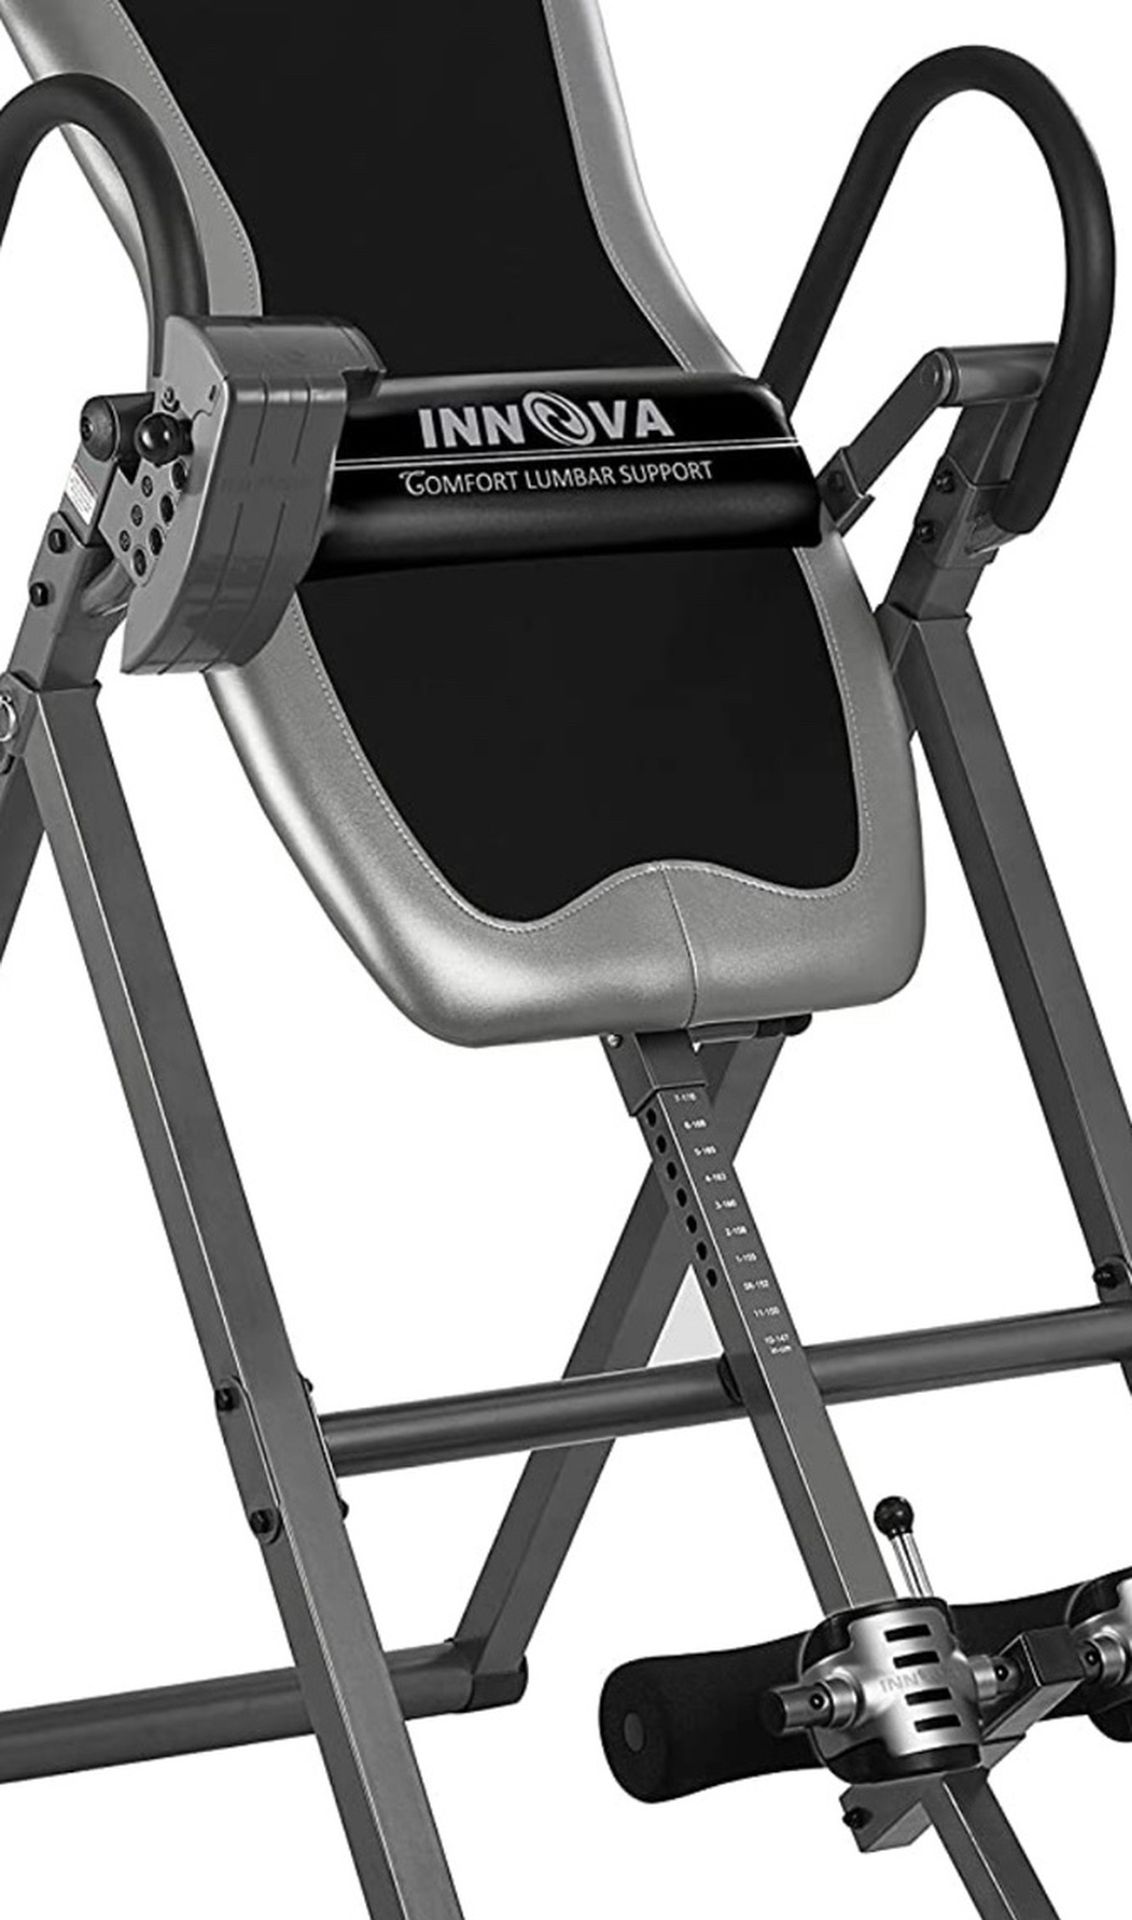 Itx Power Inversion Table For Bad Backs Back Stretching Equipment